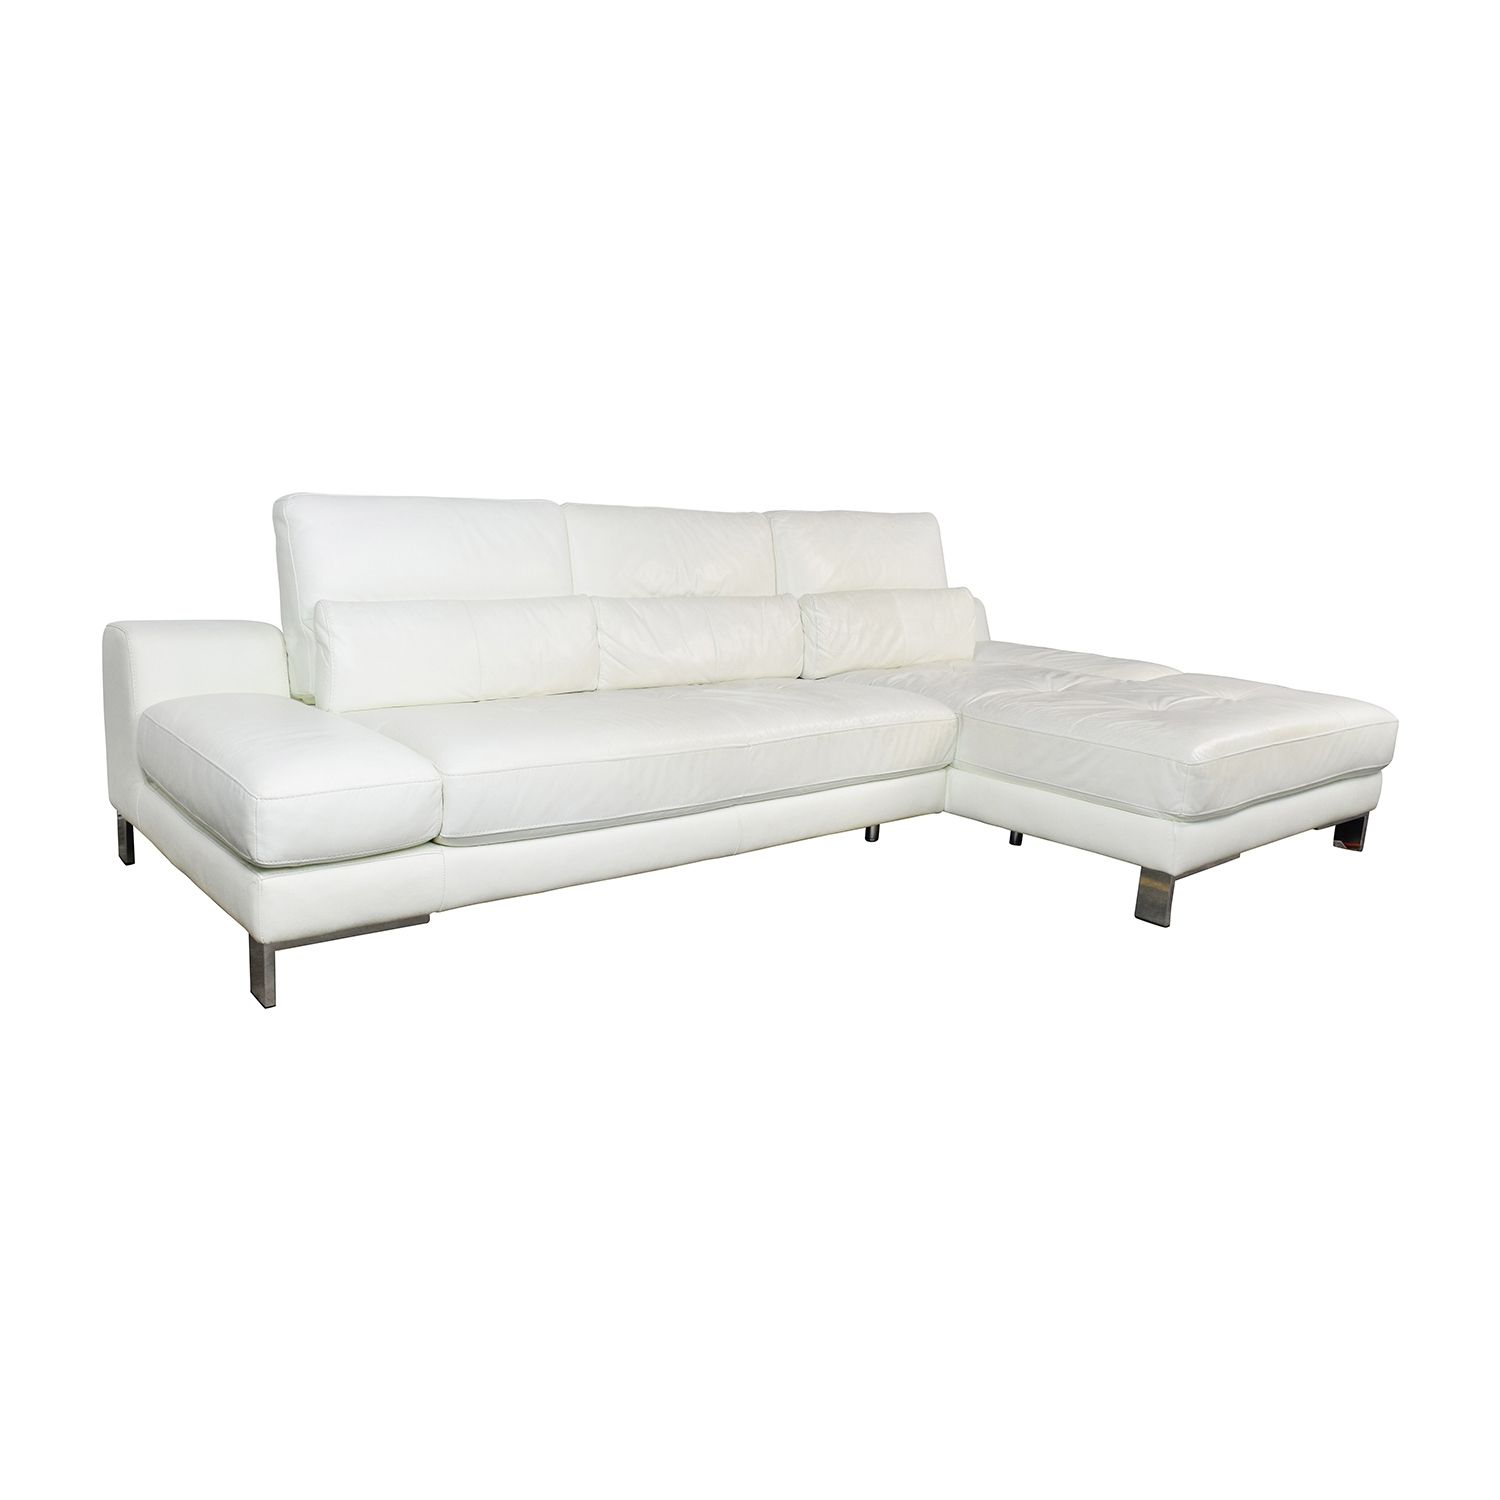 72% Off – Mobilia Canada Mobilia Canada Funktion White Leather Throughout Mobilia Sectional Sofas (Photo 4 of 10)